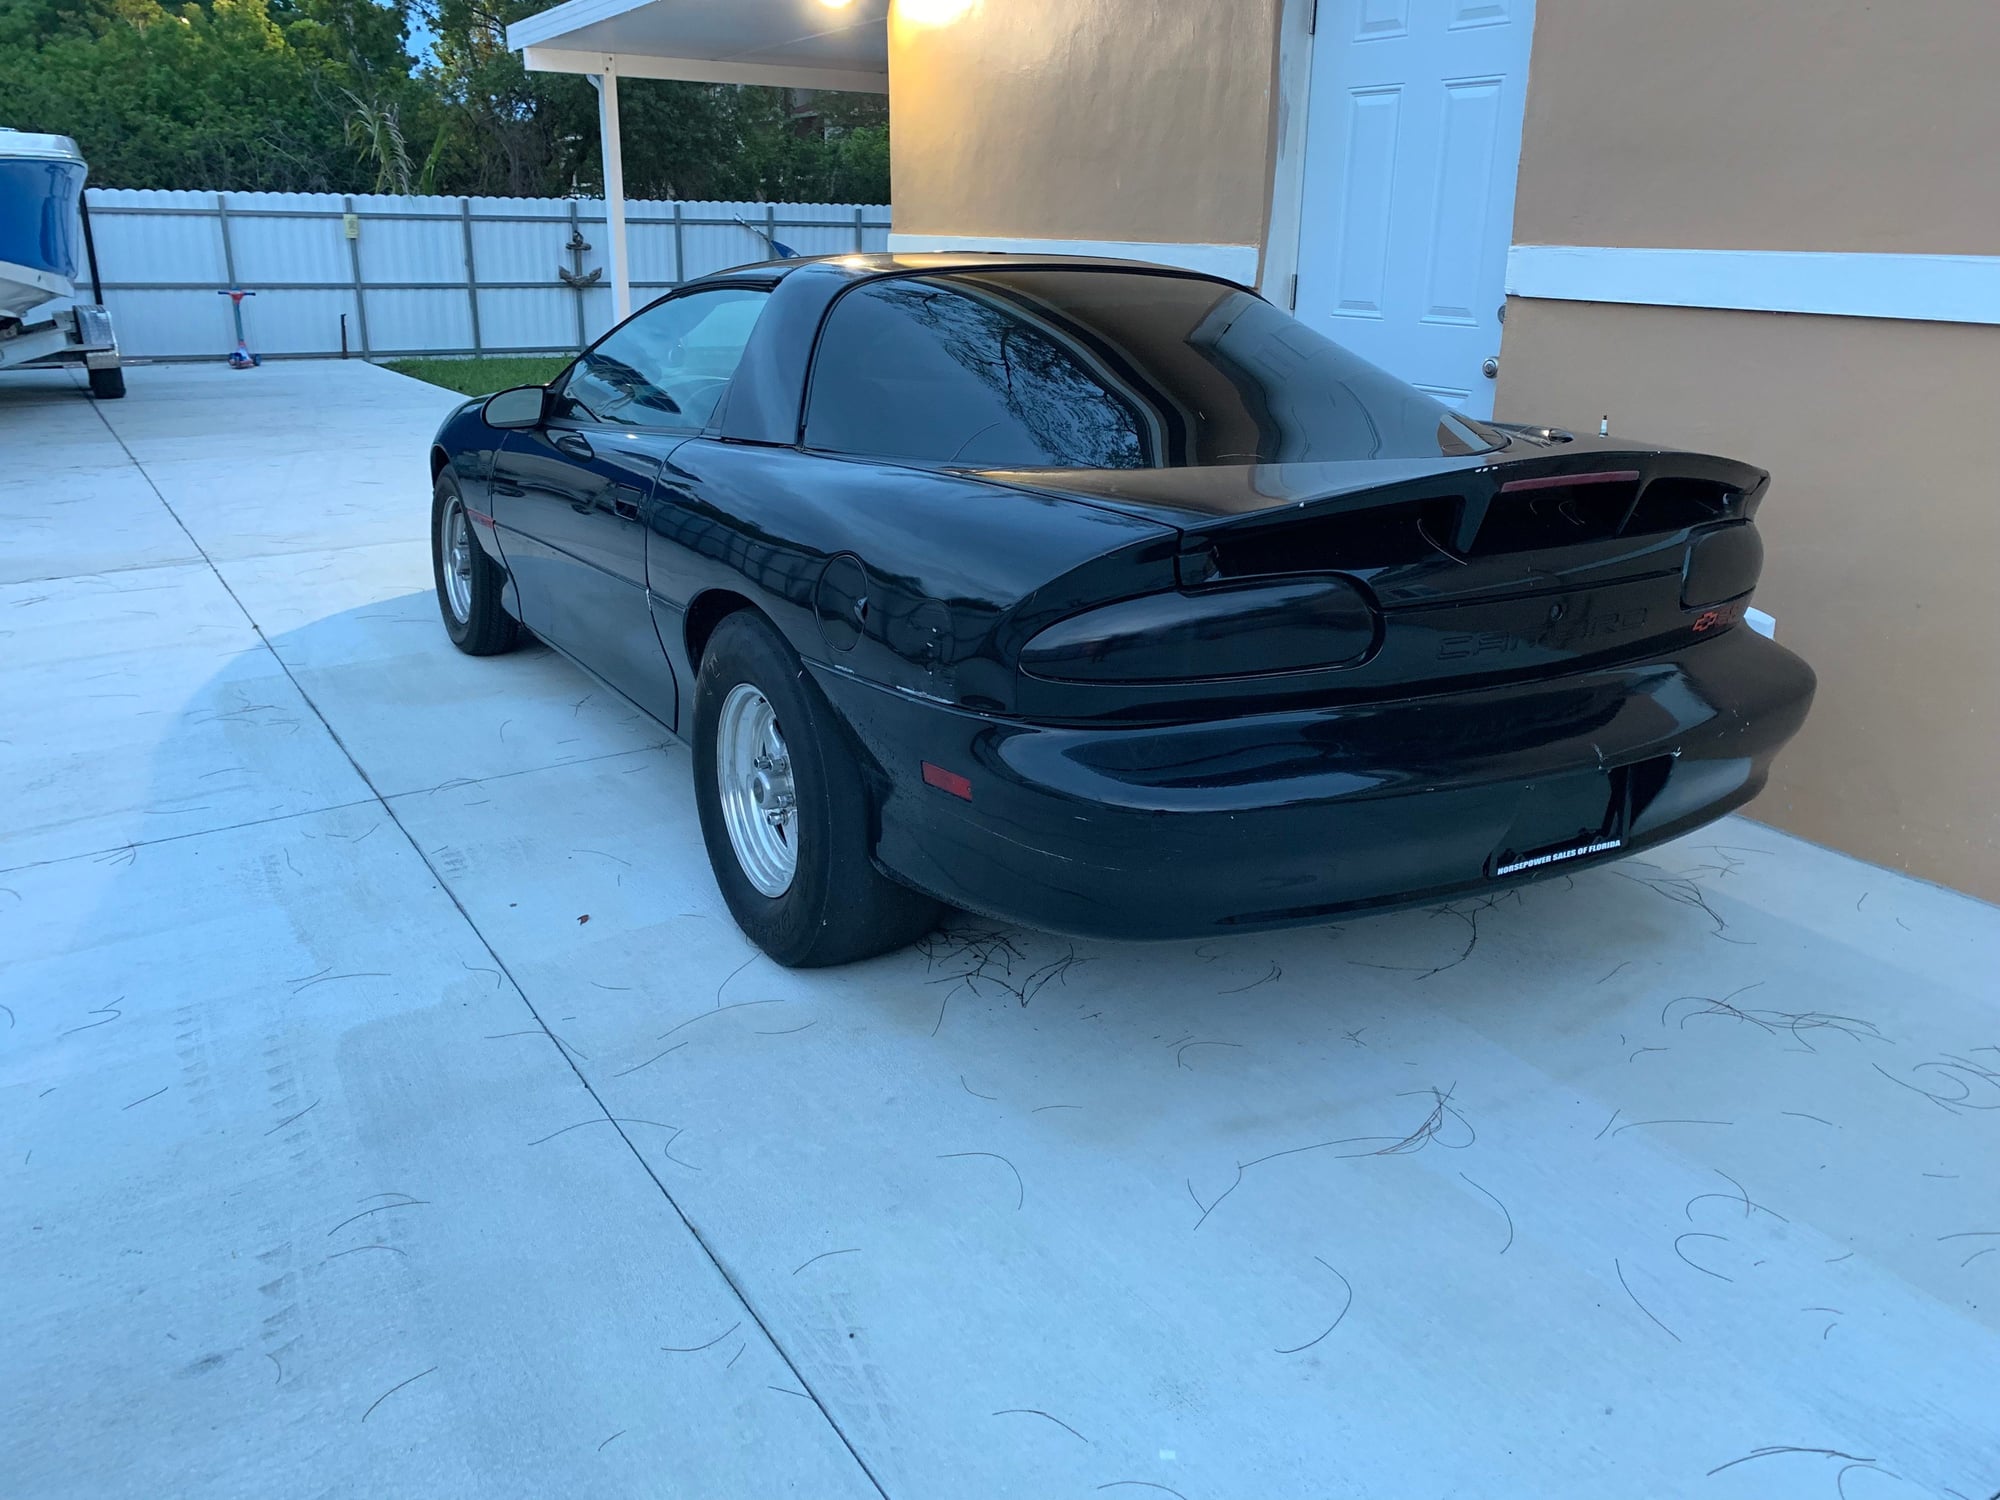 1998 Chevrolet Camaro - Selling my 9sec street strip camaro Ss - Used - VIN 2g1fp22g3w2128872 - 8 cyl - 2WD - Automatic - Coupe - Black - Miami, FL 33147, United States